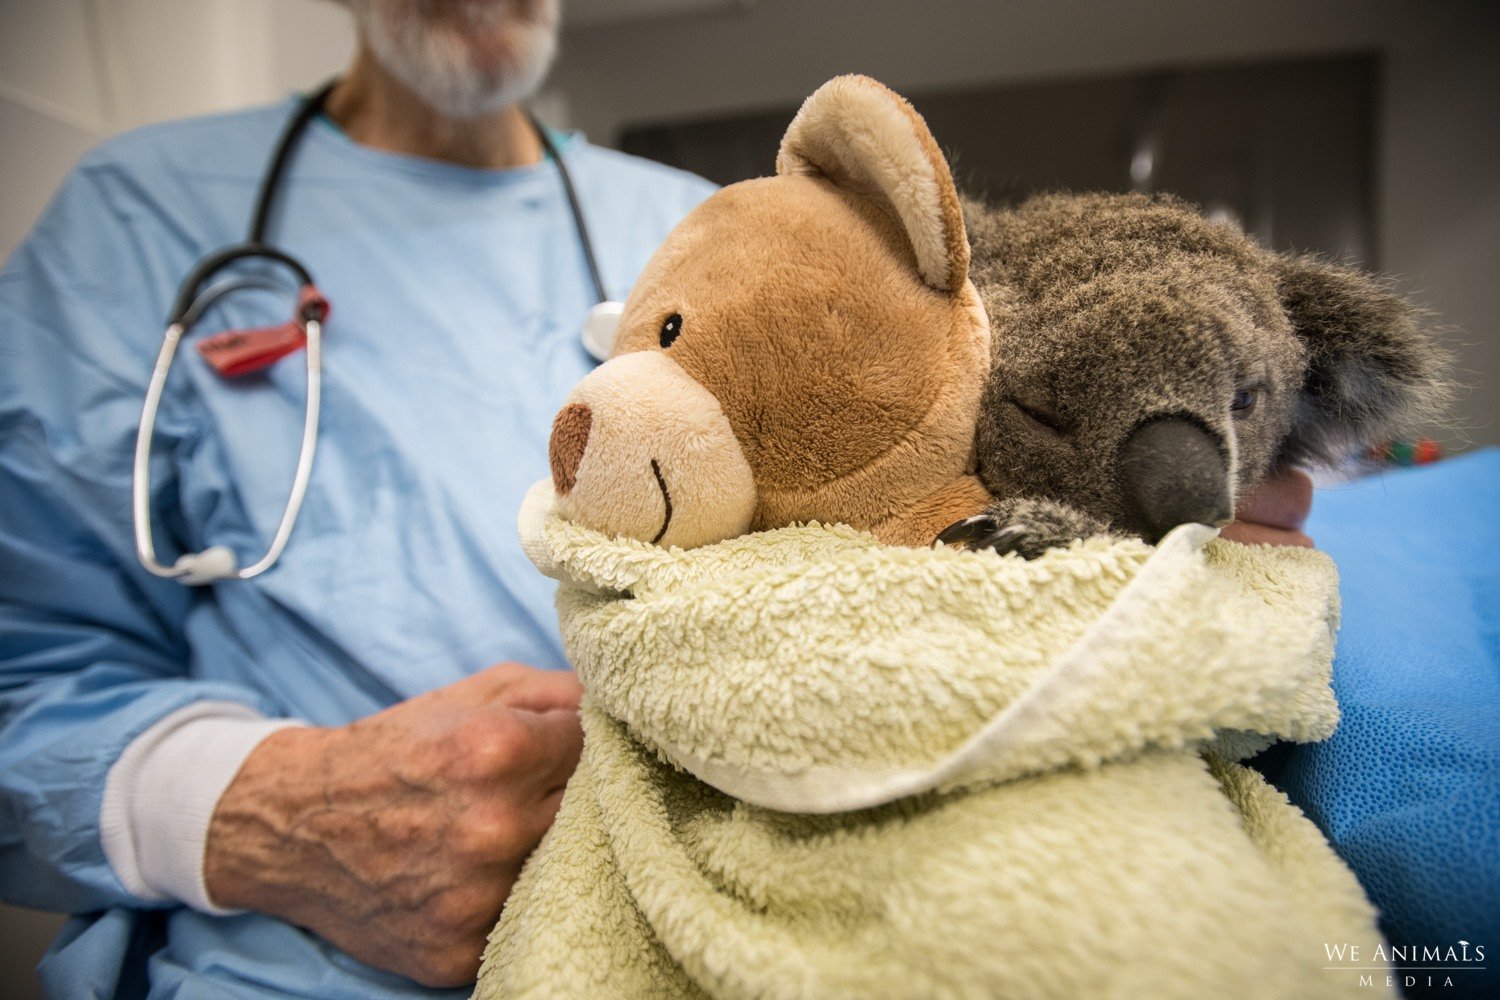 A photo of a koala being rehabilitated at Southern Cross Wildlife Care.